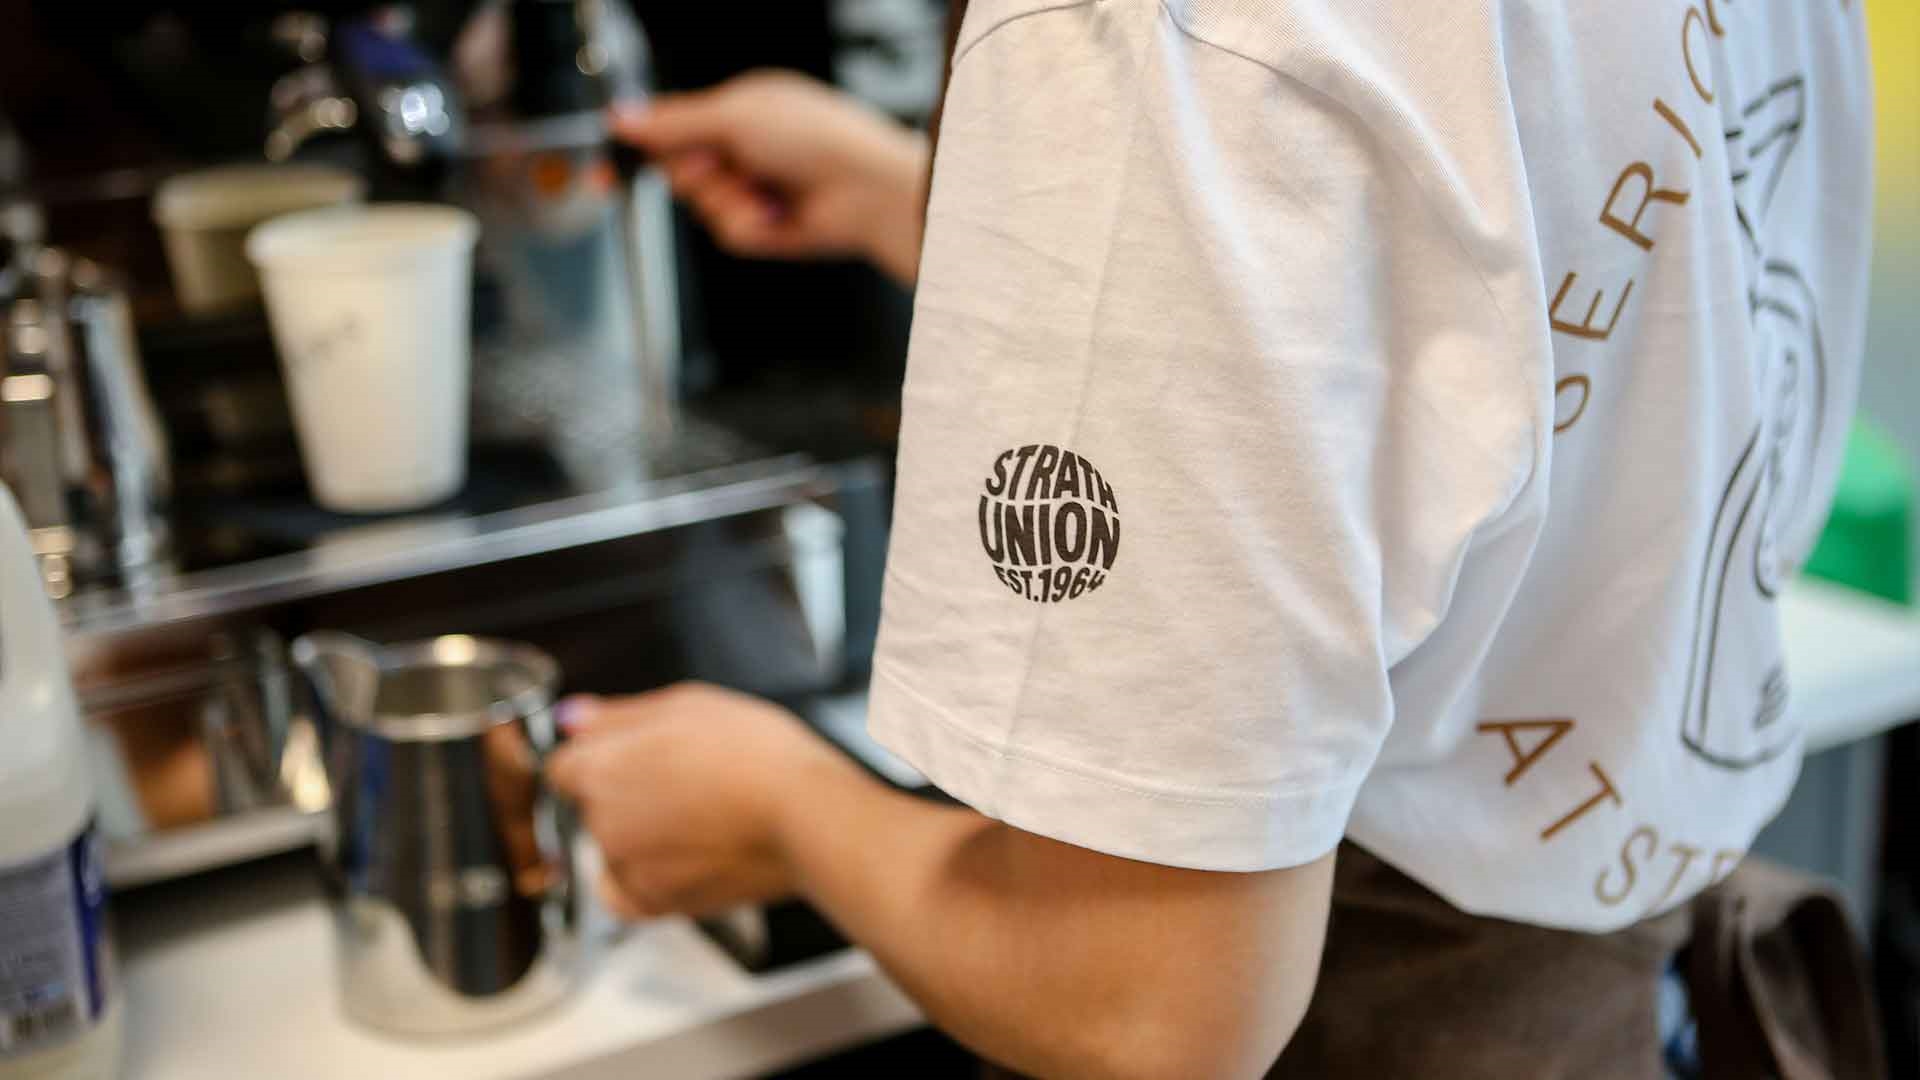 A staff member wearing a white t-shirt with a black Strath Union logo printed on the sleeve